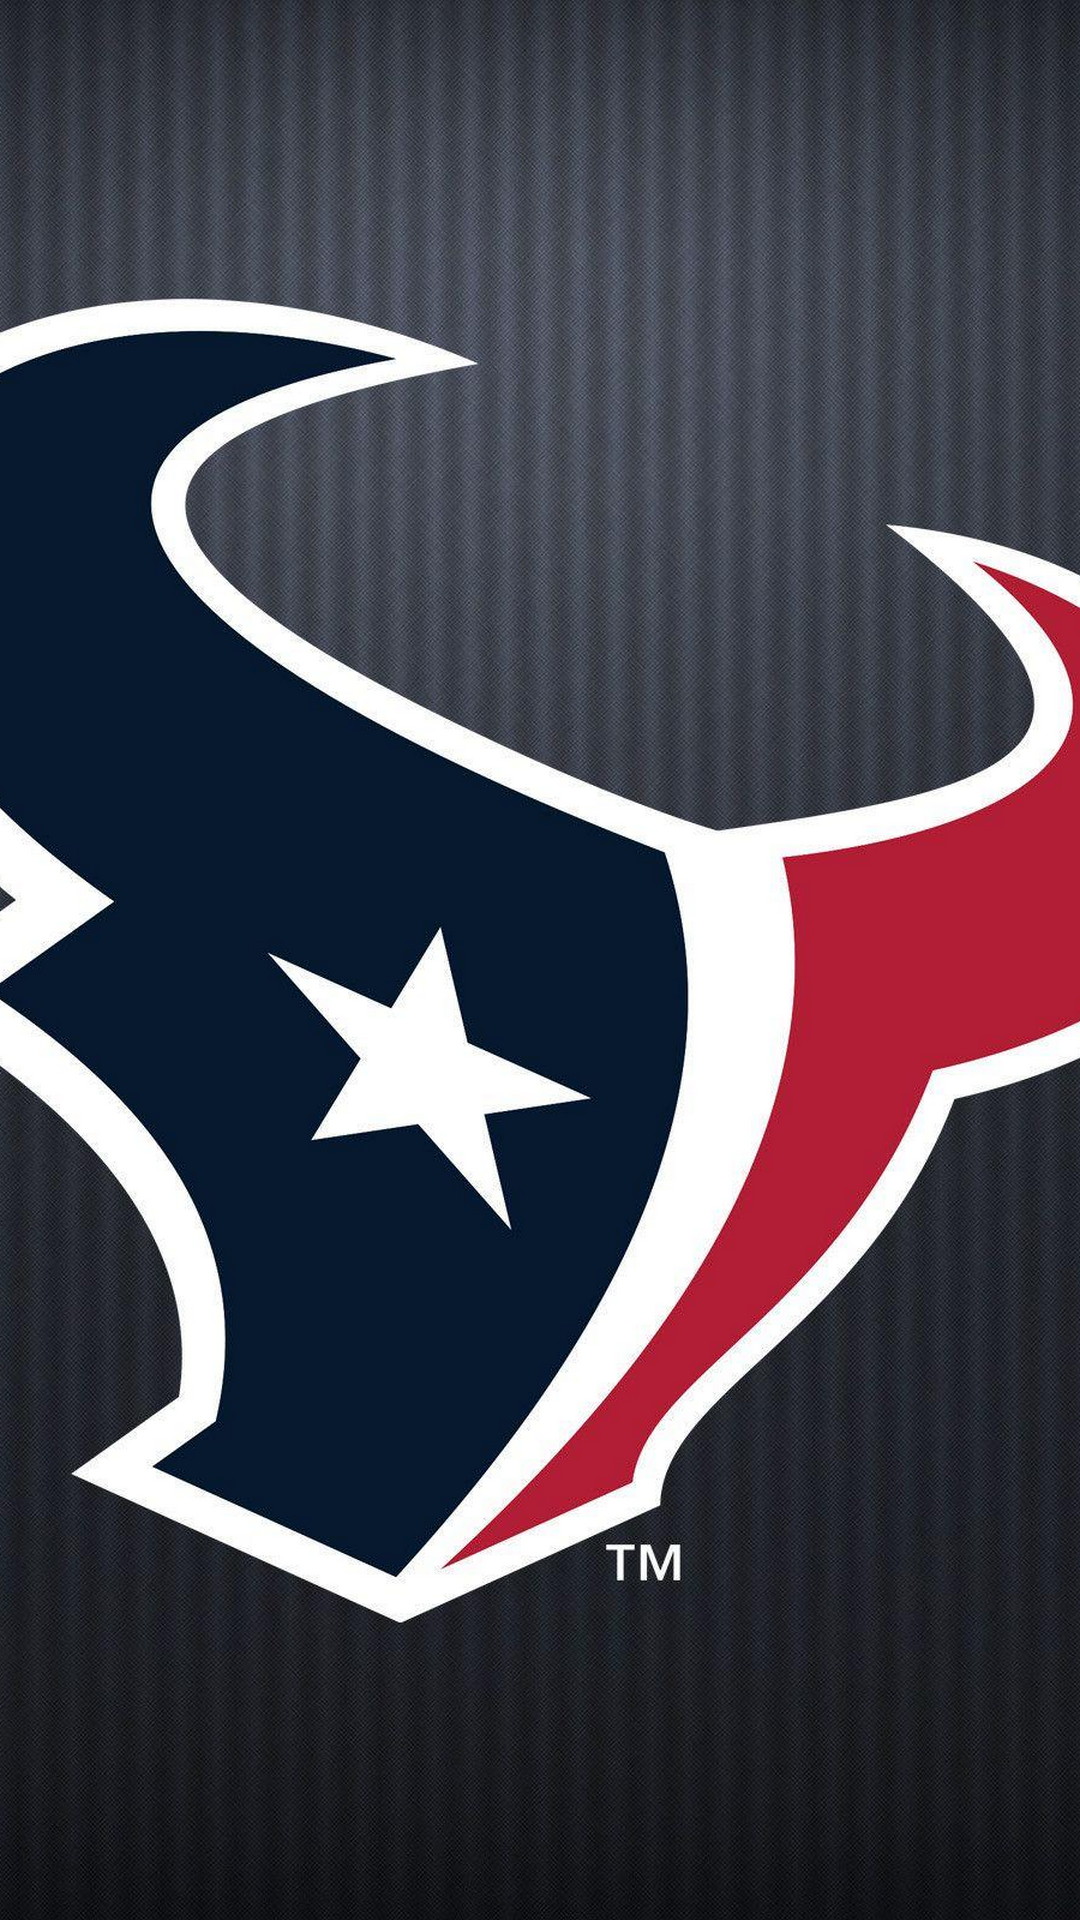 Houston Texans iPhone Screen Wallpaper With high-resolution 1080X1920 pixel. Donwload and set as wallpaper for your iPhone X, iPhone XS home screen backgrounds, XS Max, XR, iPhone8 lock screen wallpaper, iPhone 7, 6, SE, and other mobile devices